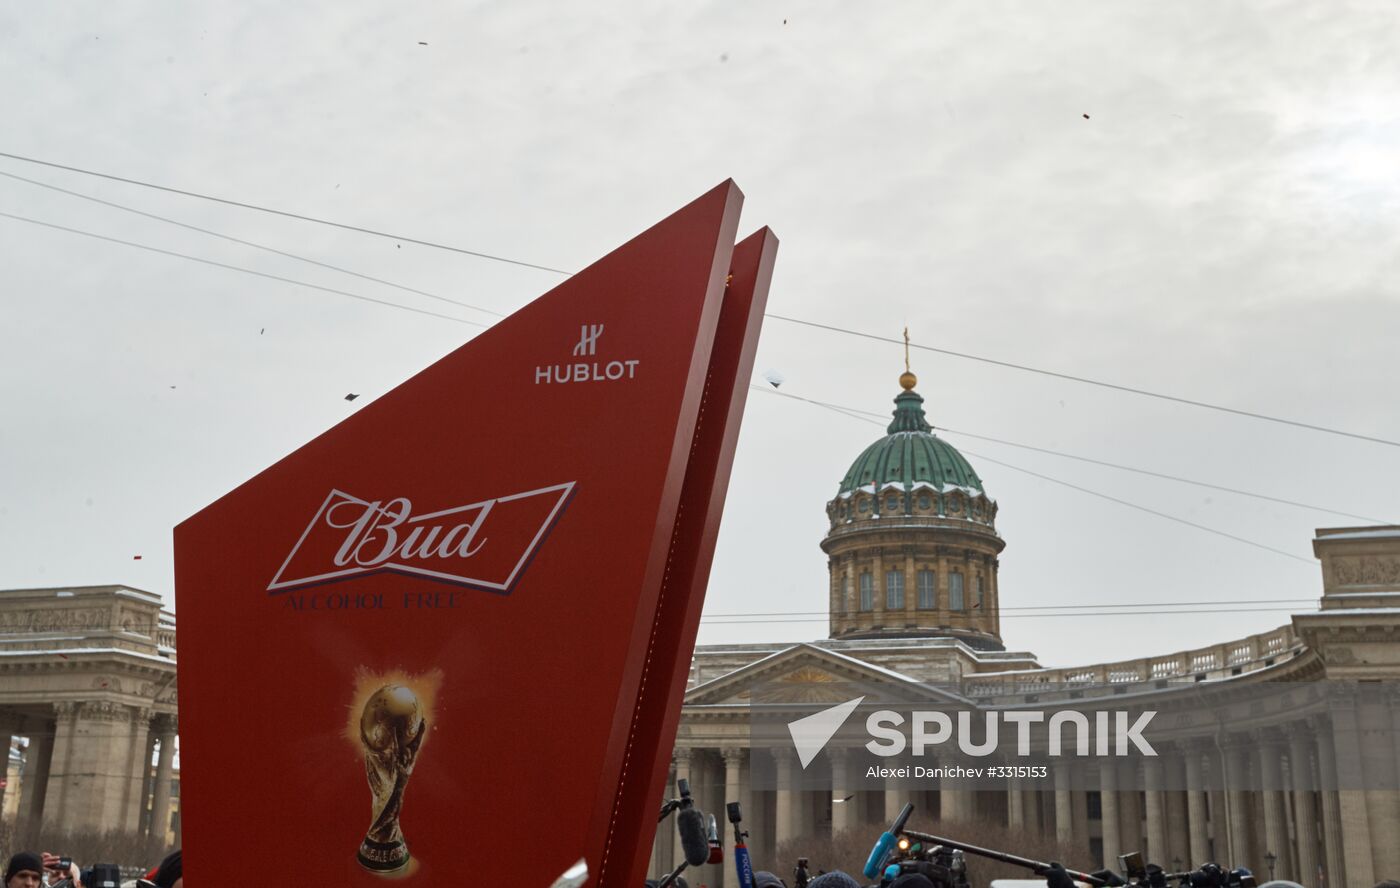 100 days to go until 2018 FIFA World Cup Russia